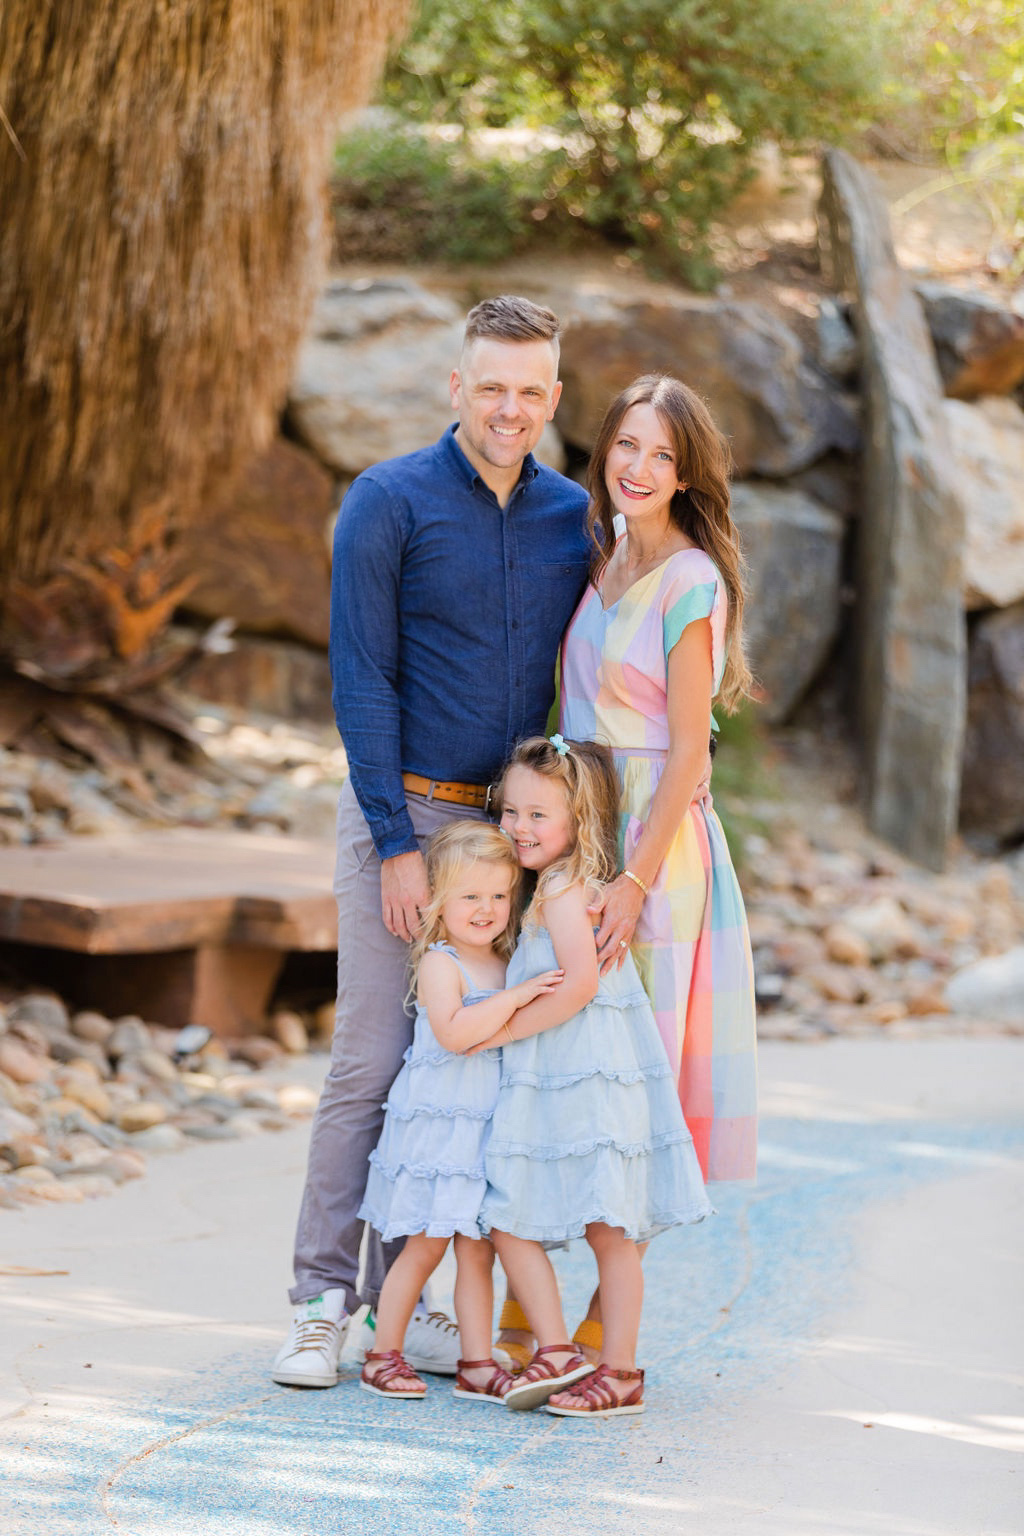 Palm Springs family photo | Finding Beautiful Truth